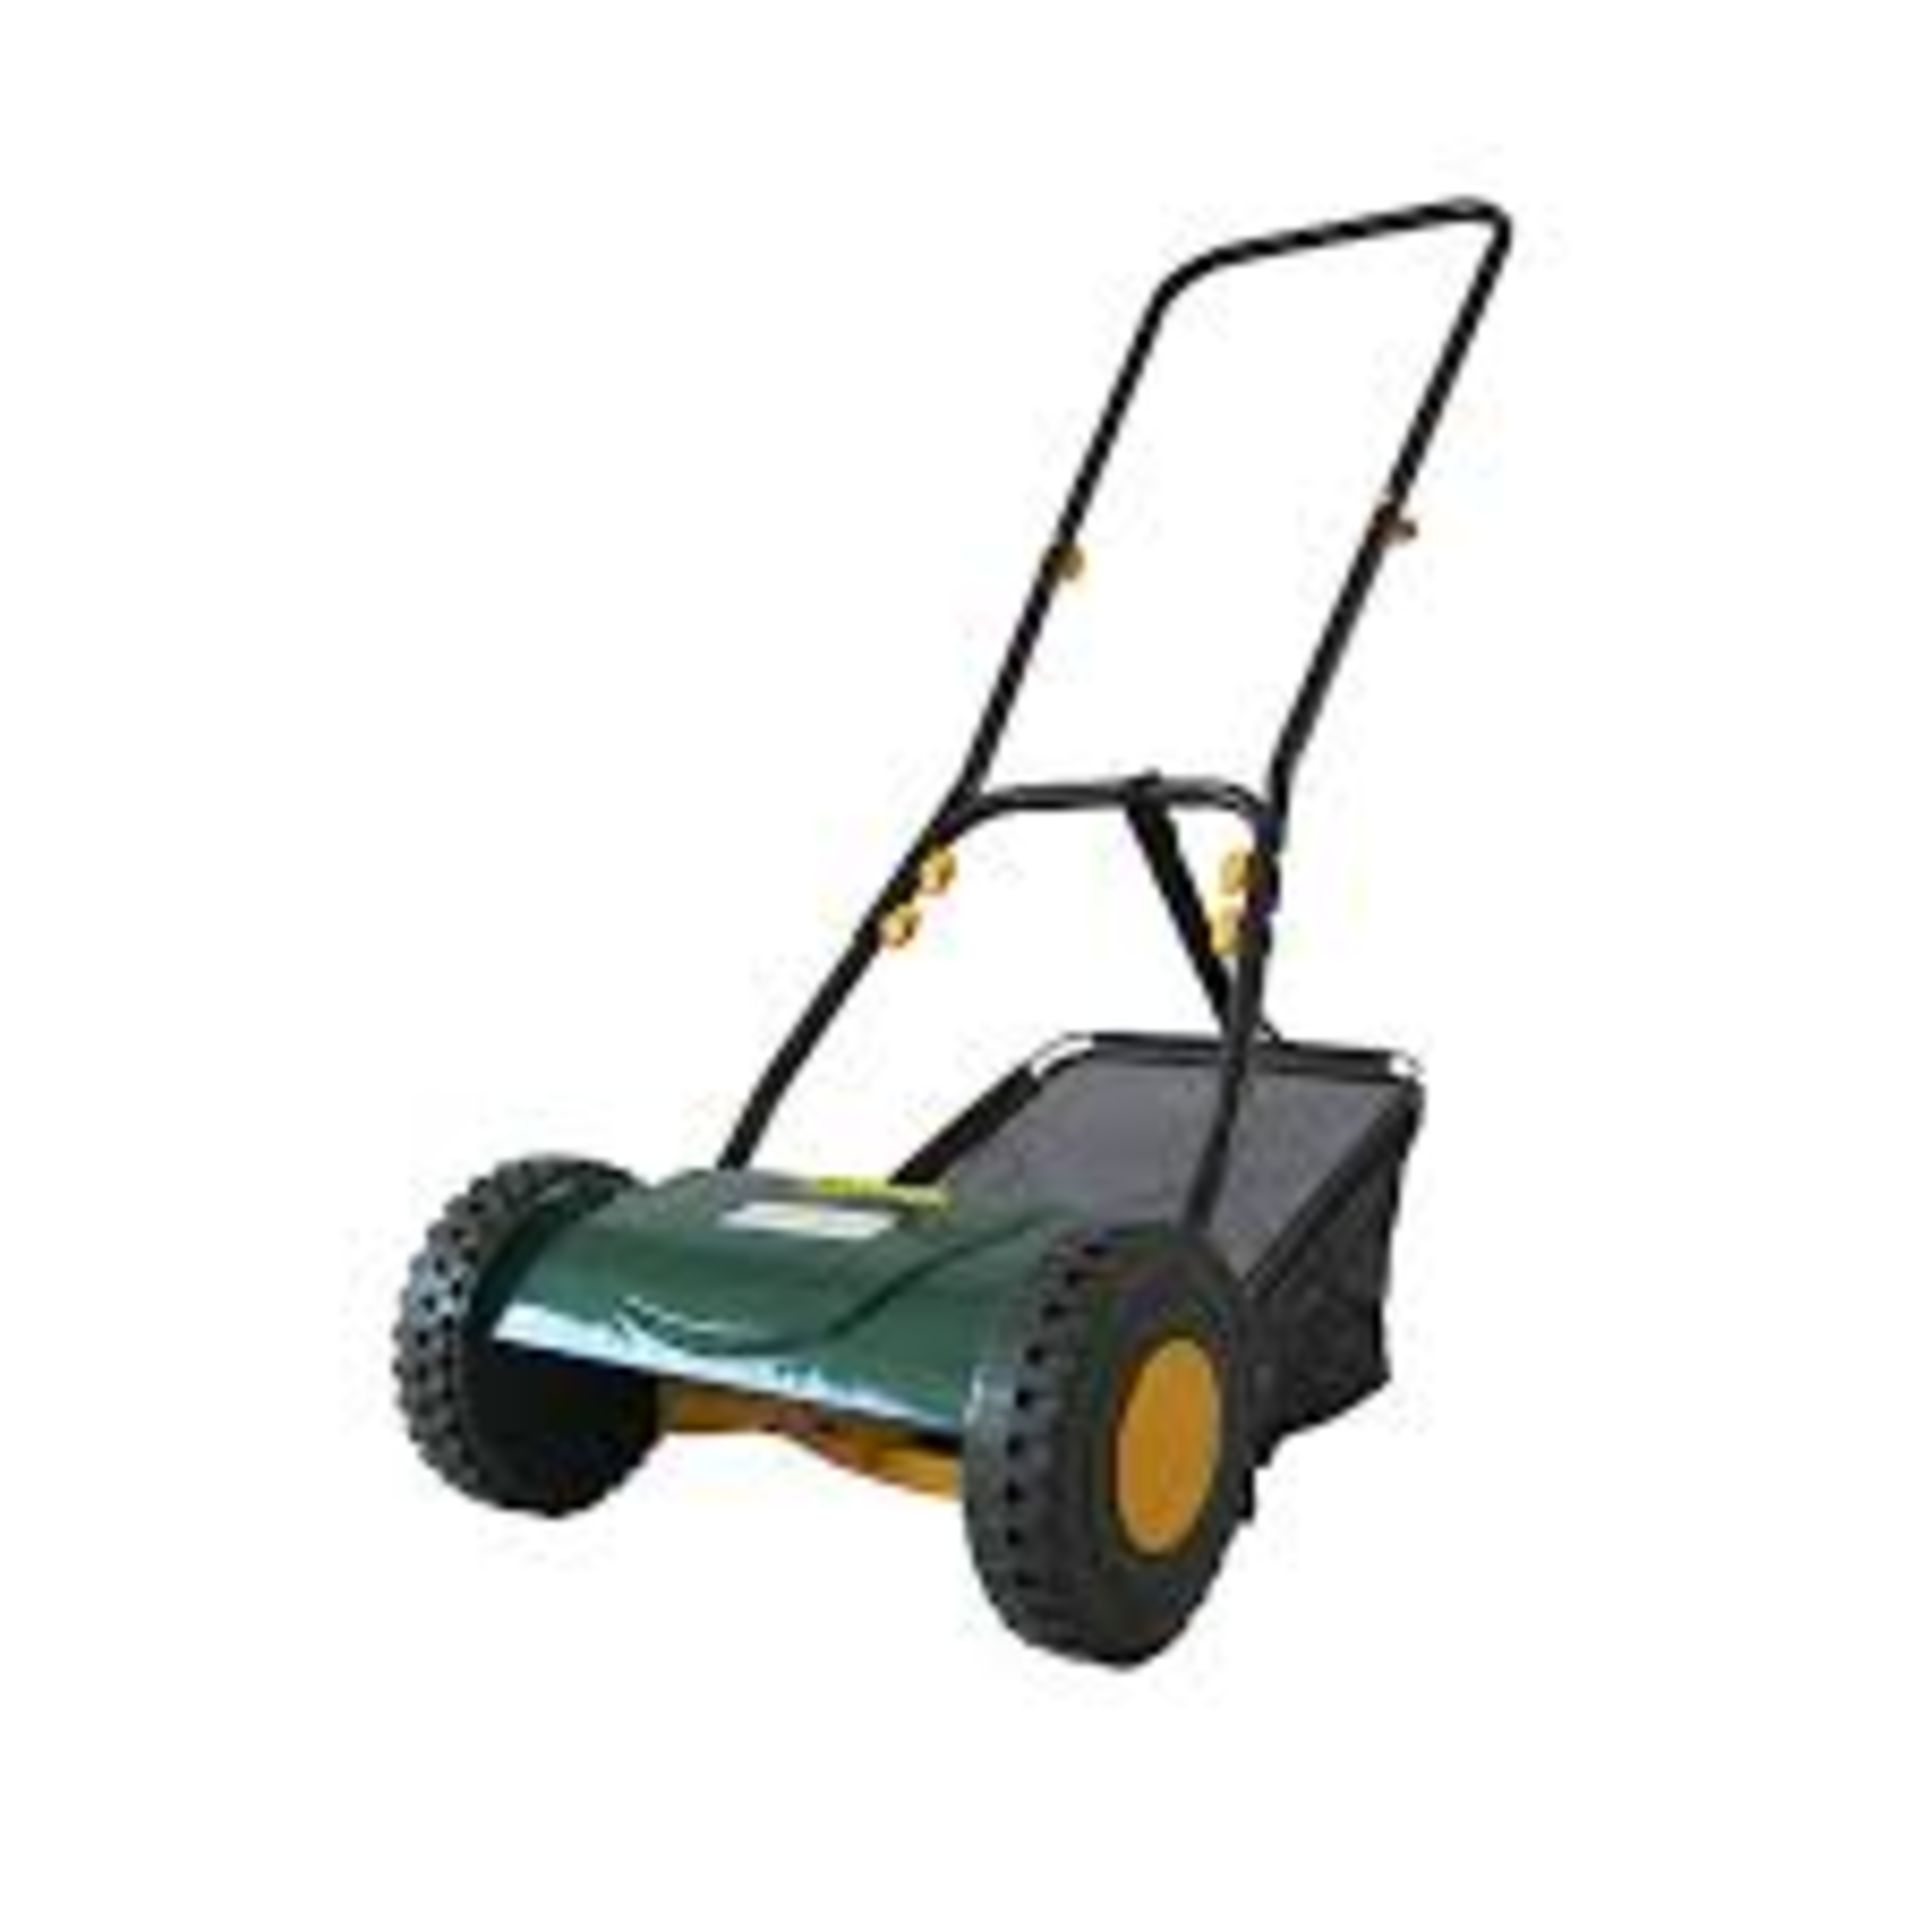 MCMP38 Push Lawnmower. - PW. Maintain a neat and tidy lawn with this B&Q hand pushed lawnmower.